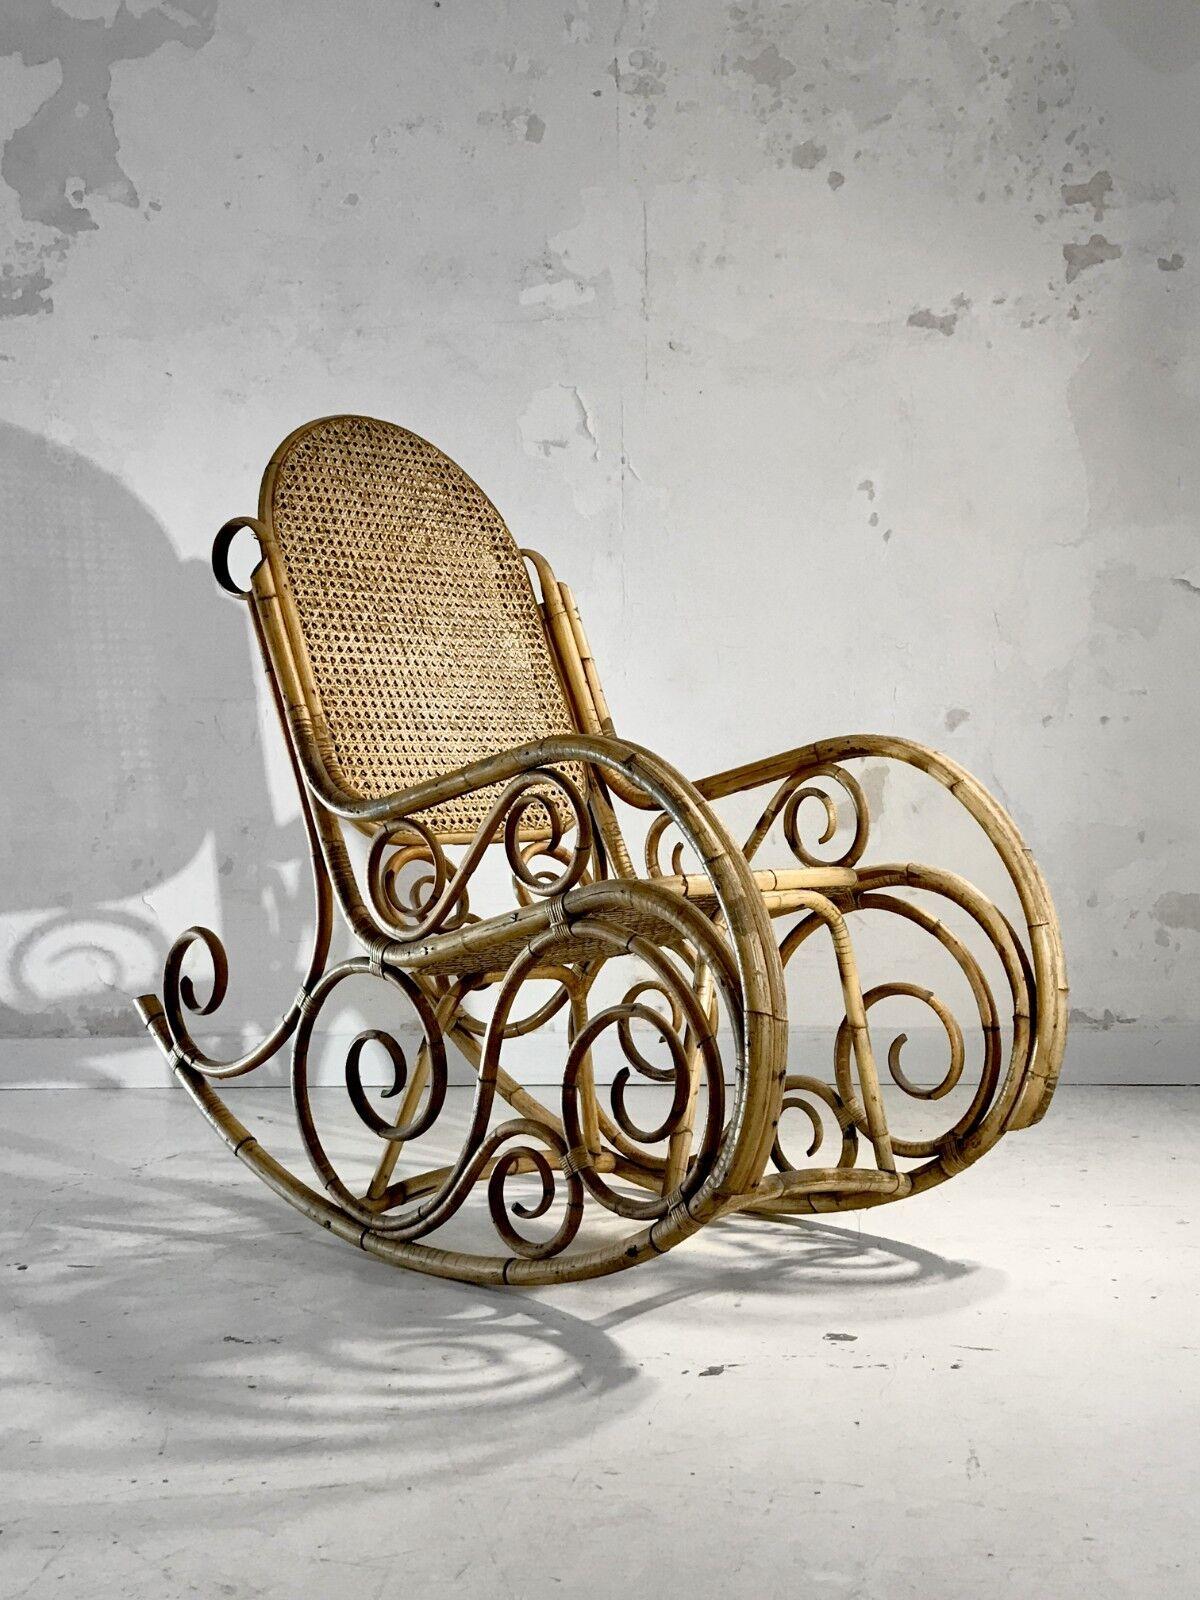 An important, very spectacular and charming free-form rocking-chair, Art-Nouveau, Art-Deco, Neo-Classical, Shabby-Chic, Free-Form, bamboo structures and cane seat, by Thonet, France 1900.

This sculptural seat is a pleasure to practice, but also to